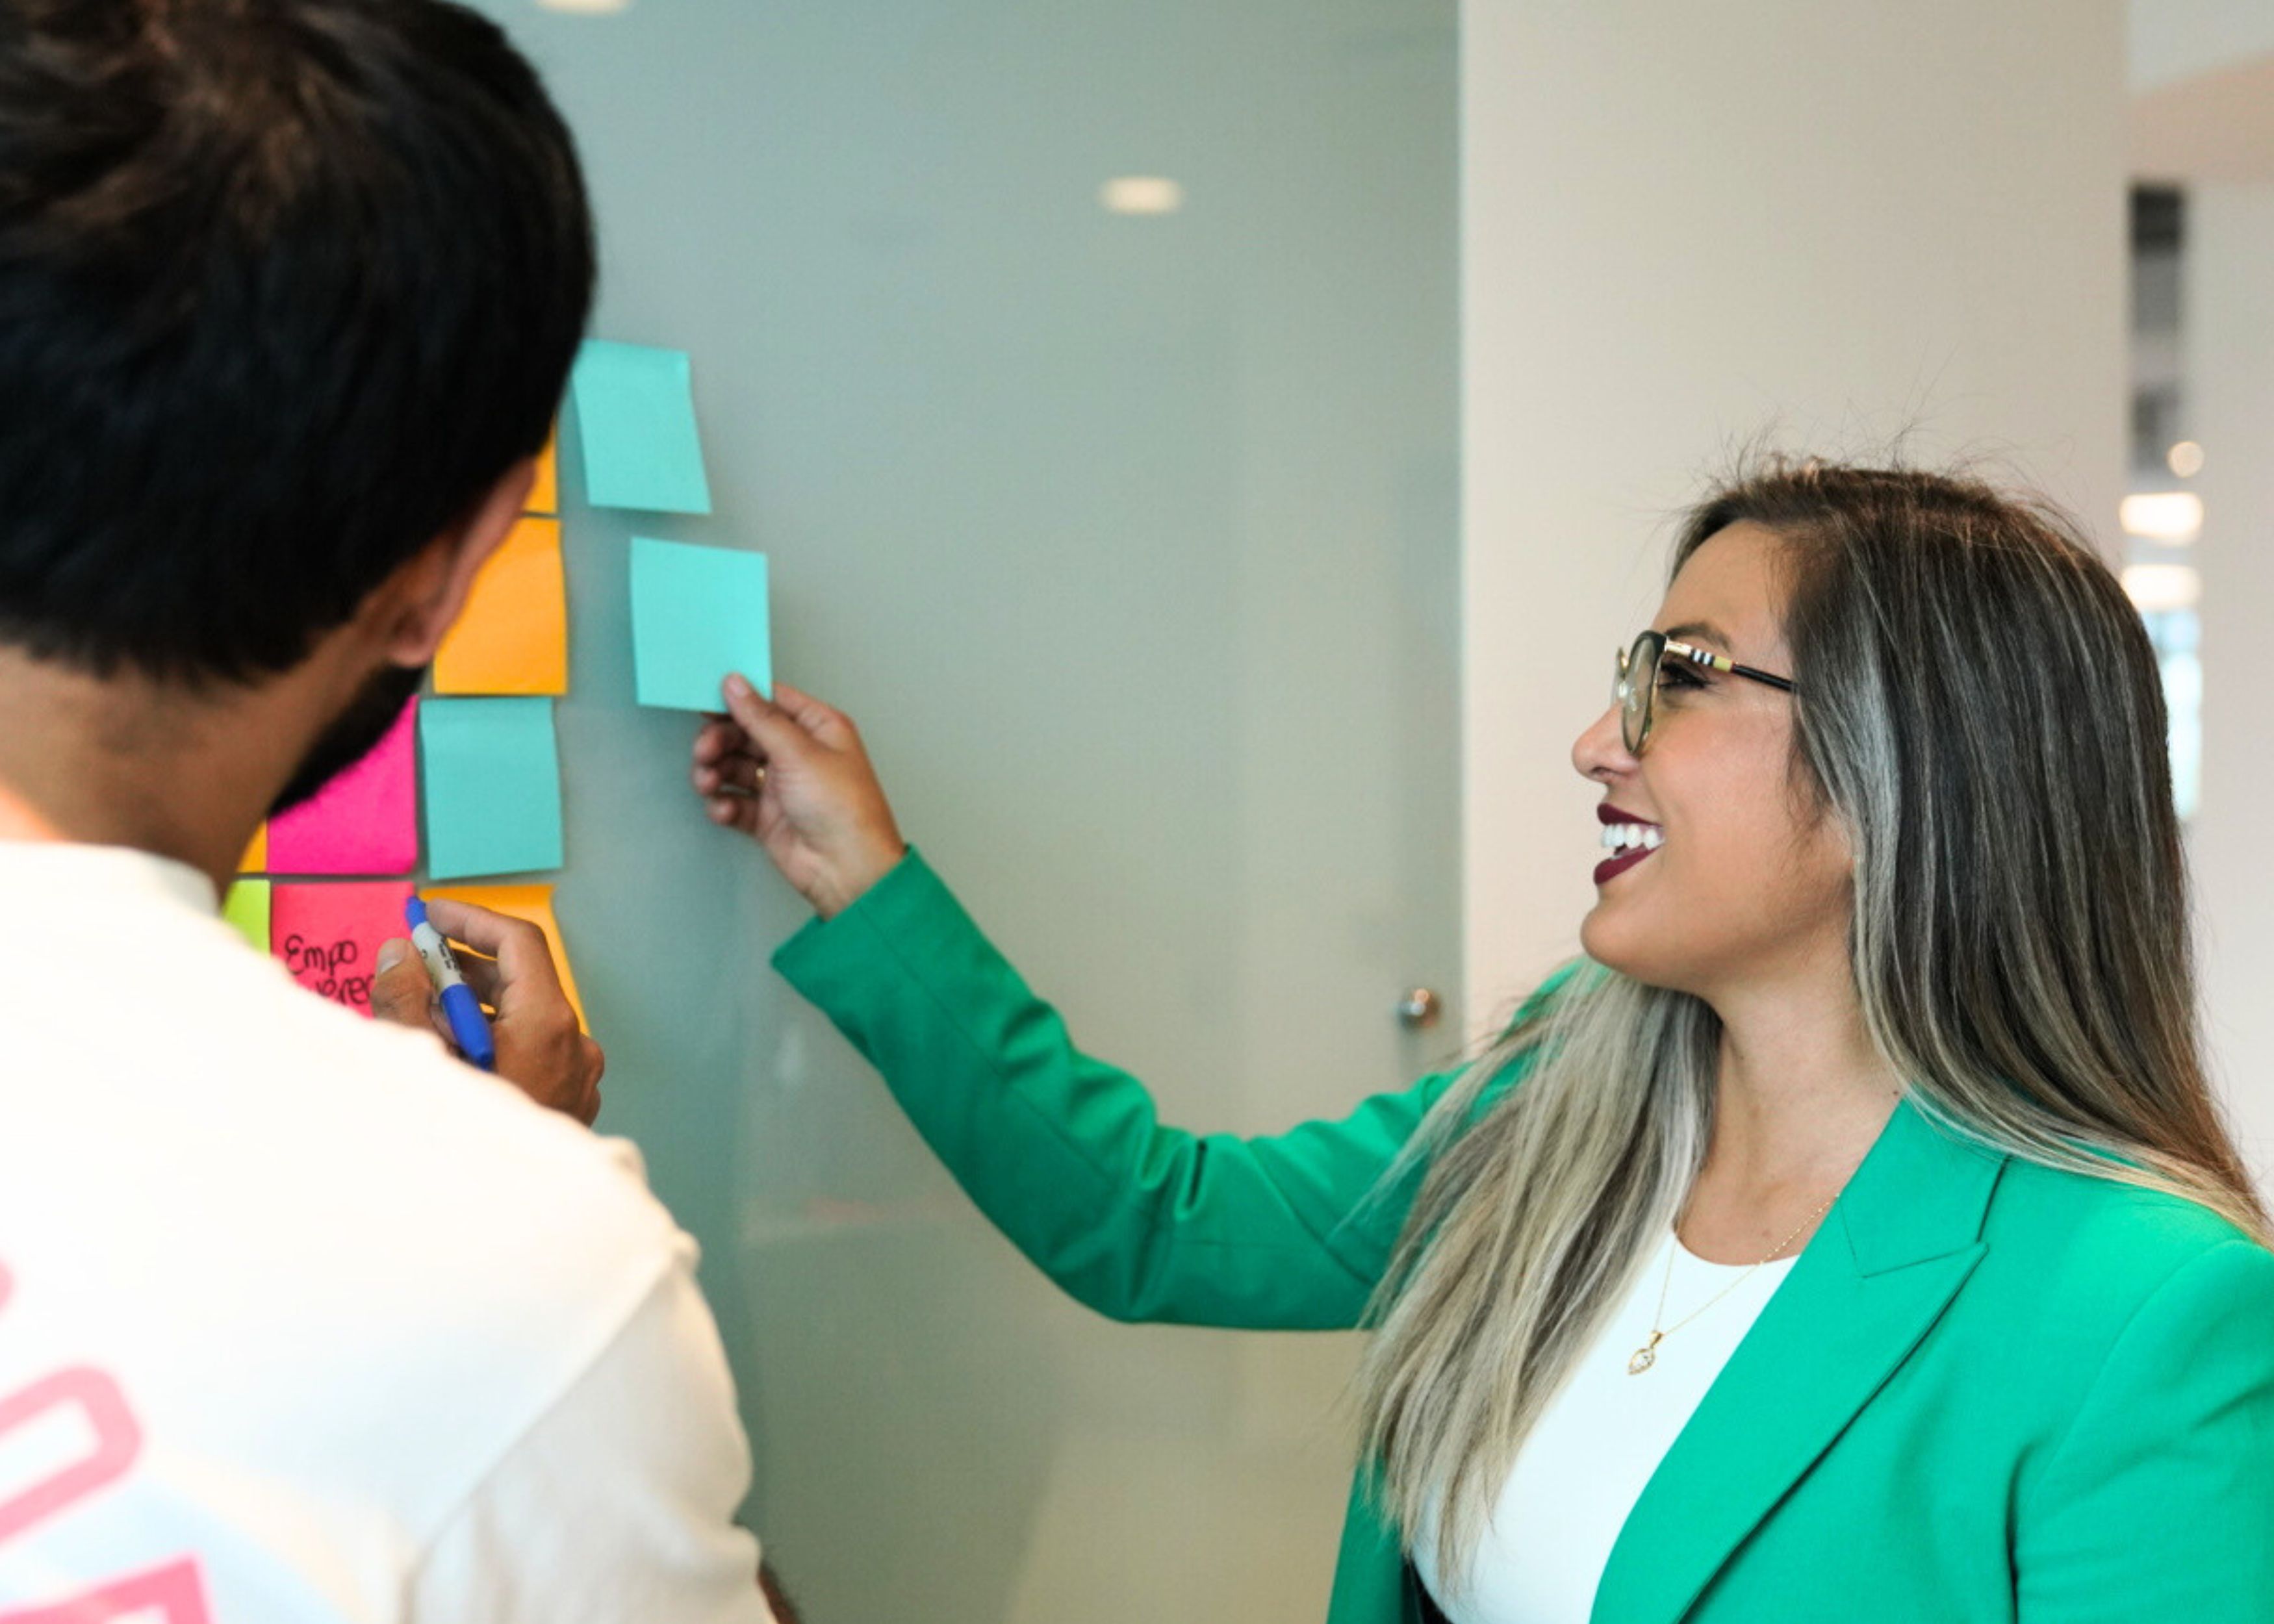 Two people working with Post-it notes attached to a glass wall